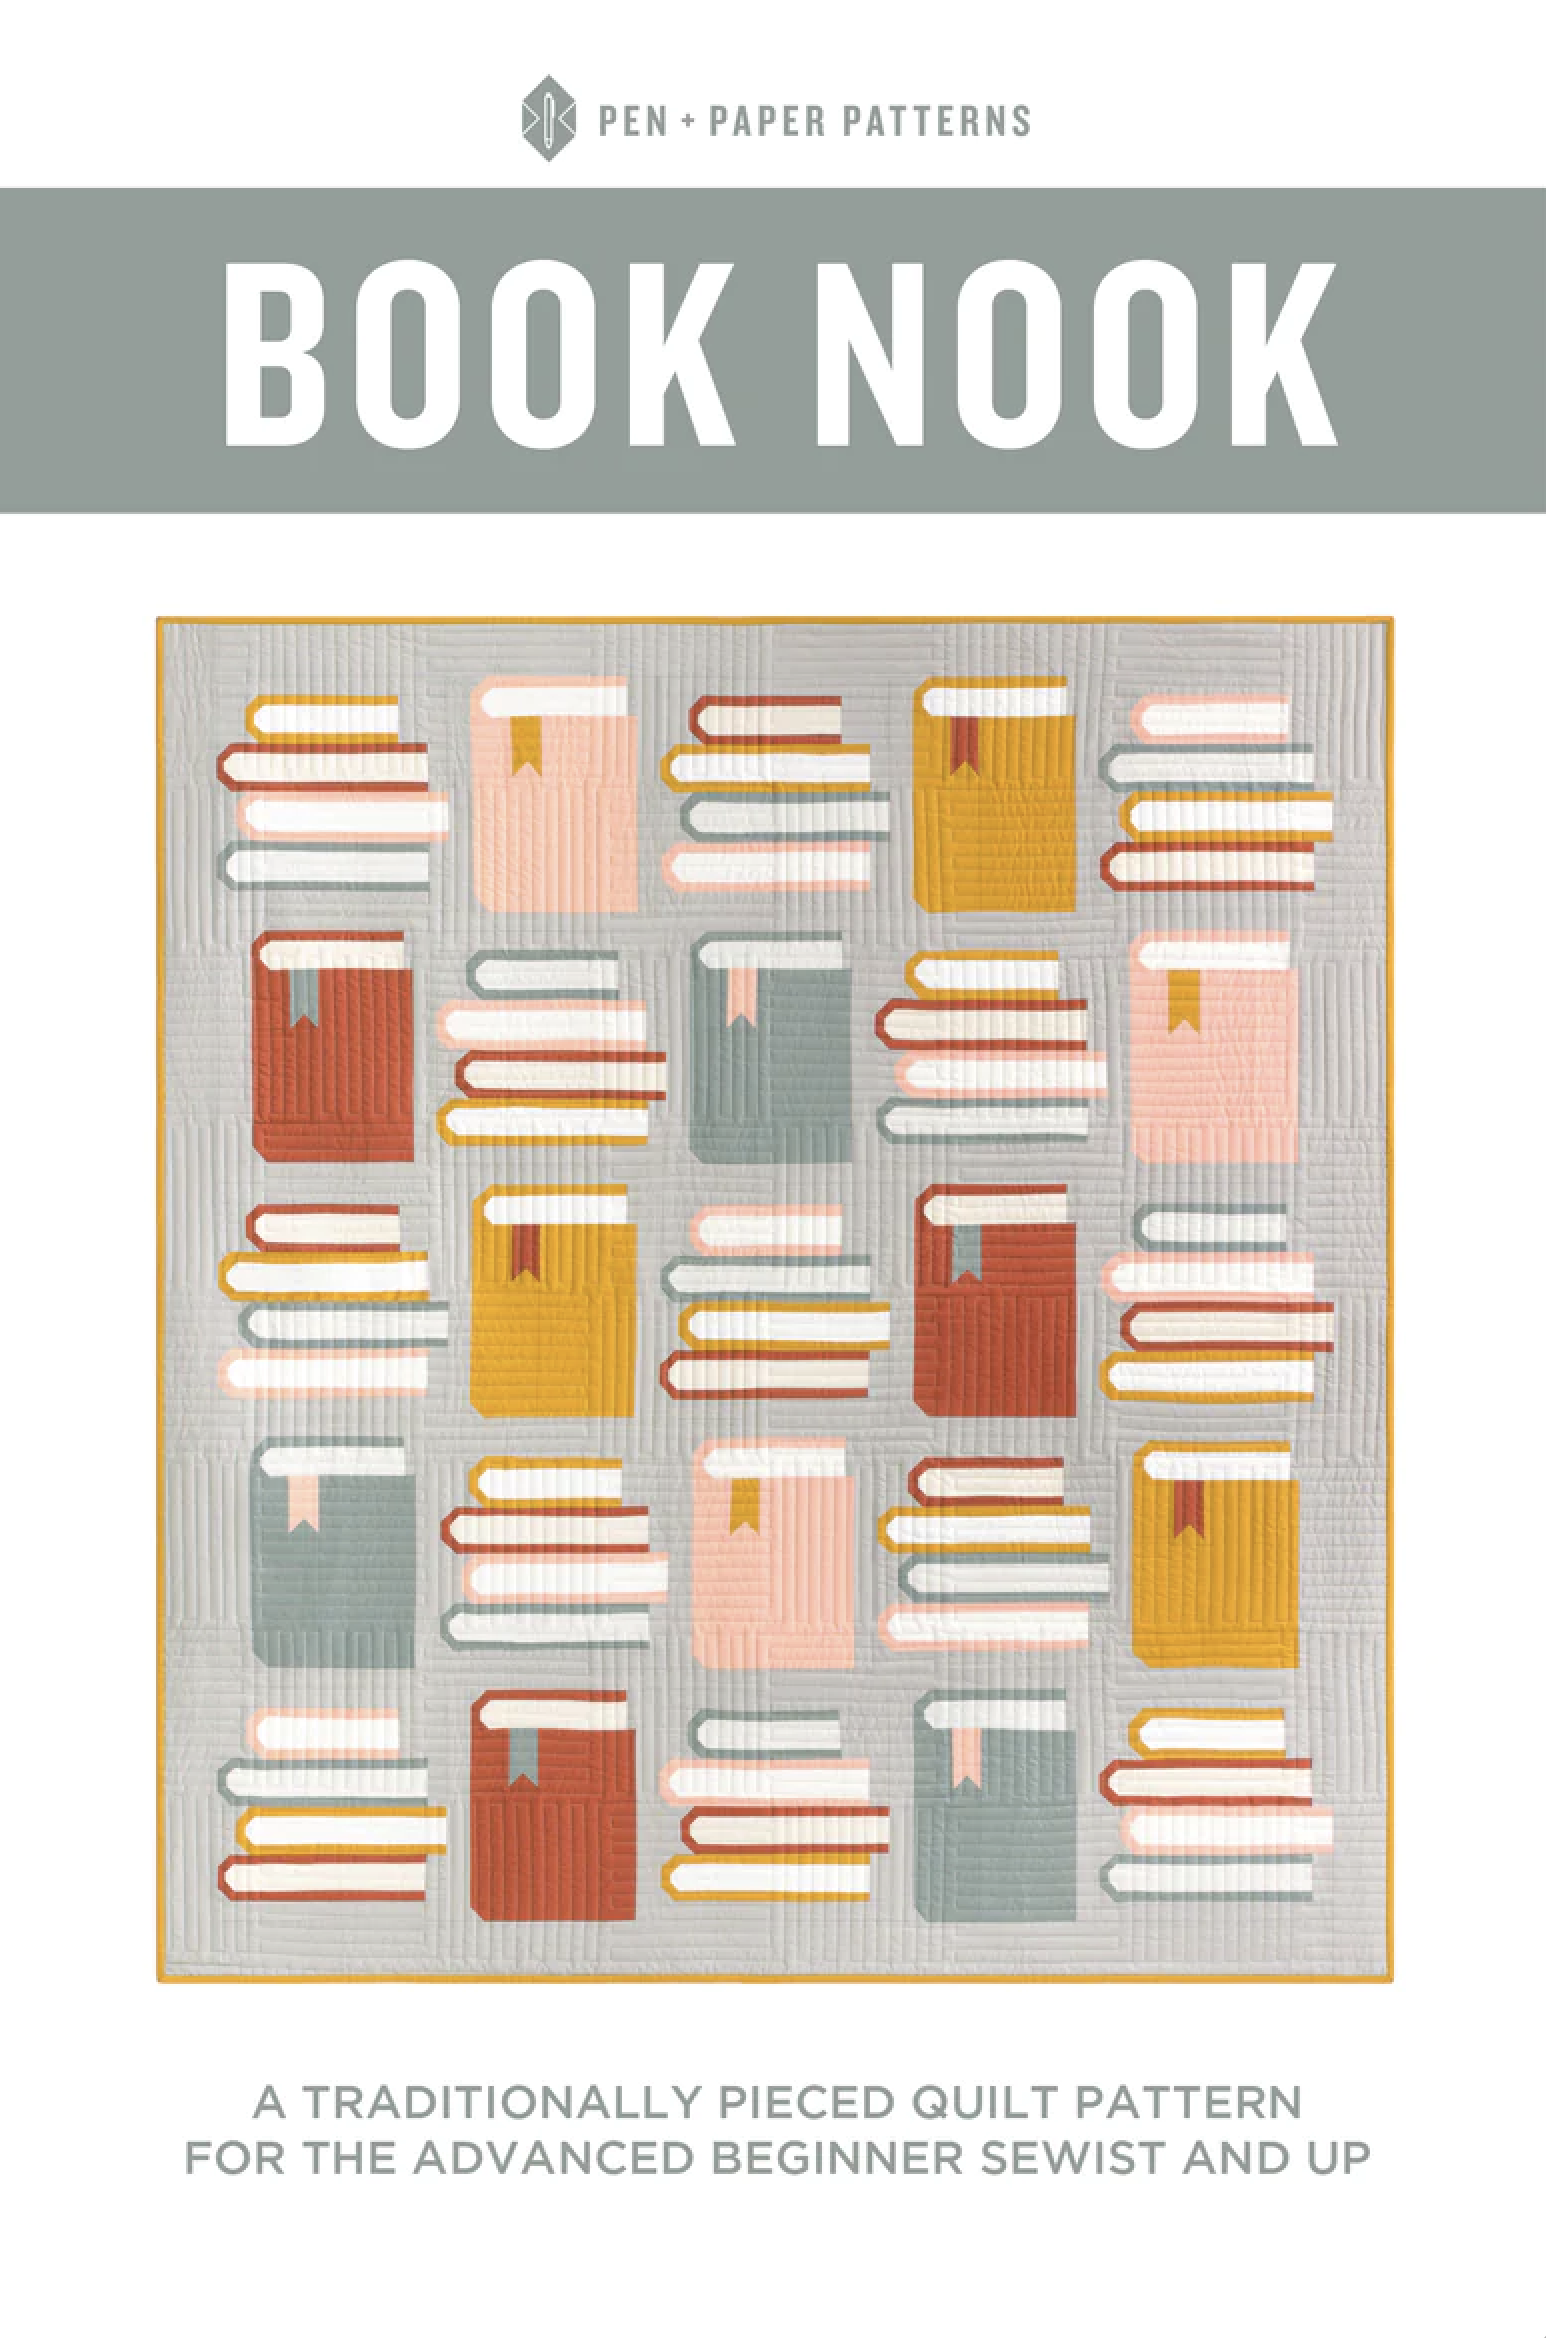 Pen and Paper Patterns Book Nook Quilt